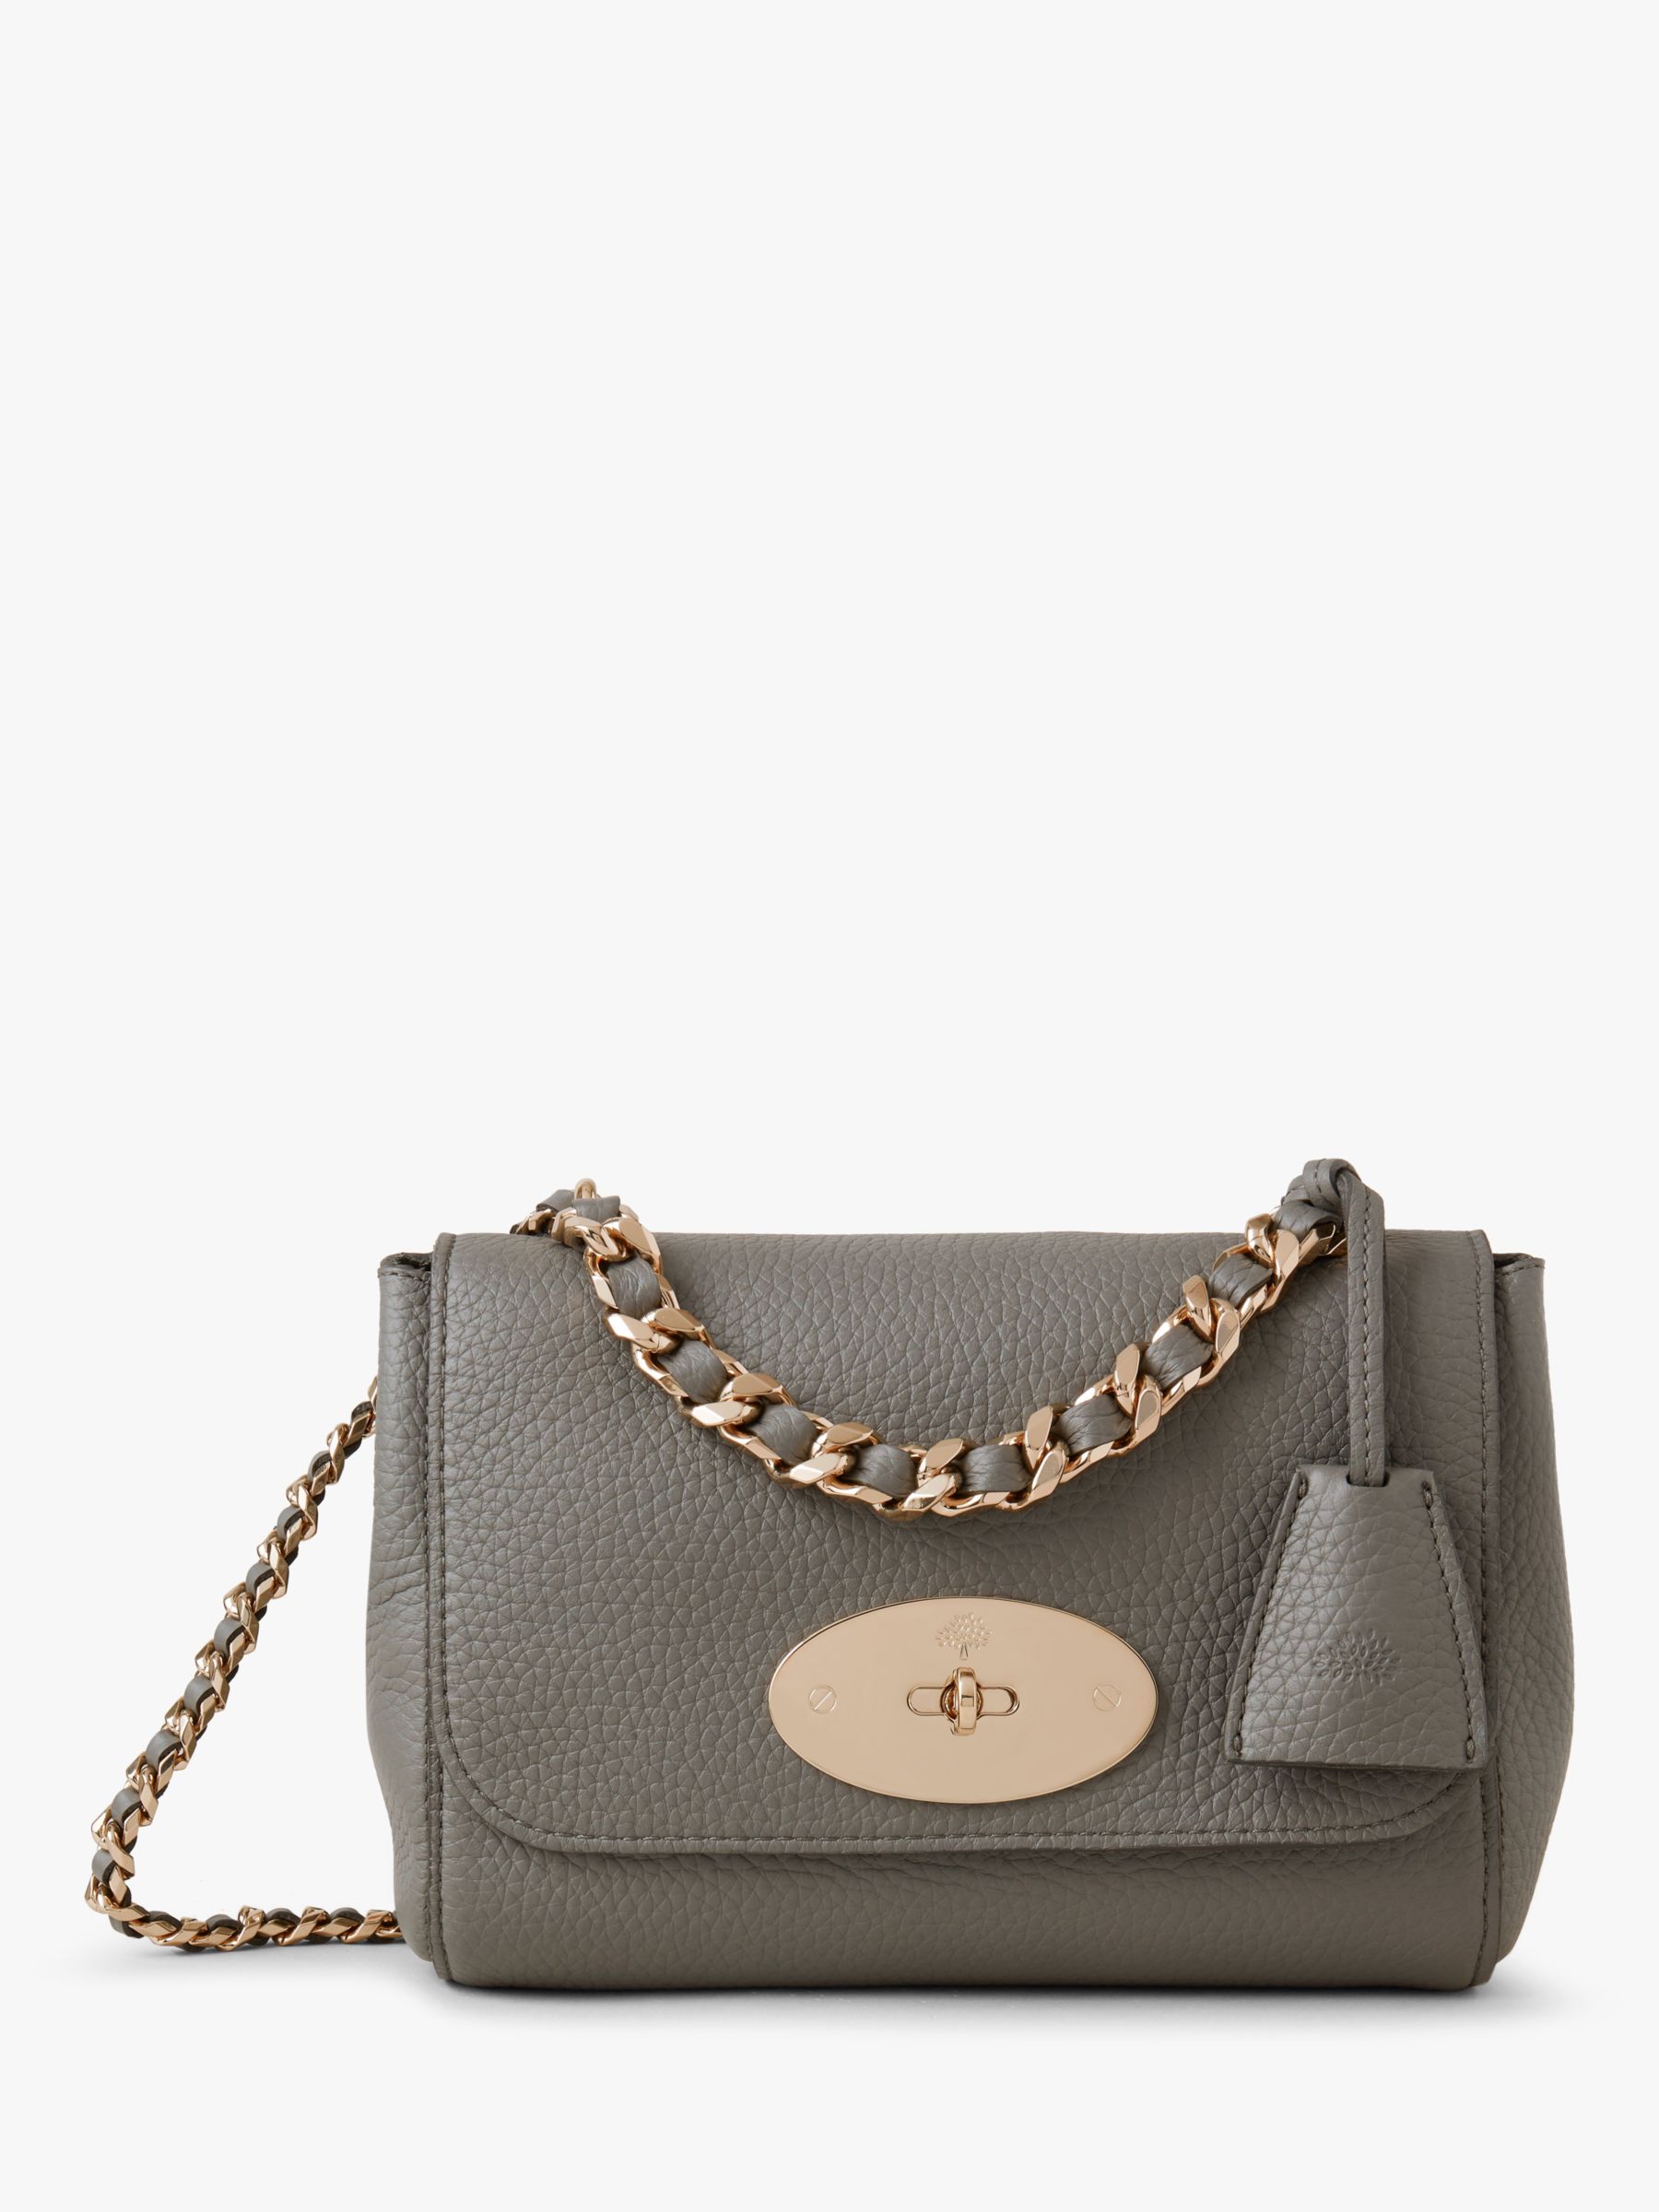 Mulberry Lily Heavy Grain Leather Top Handle Bag, Charcoal